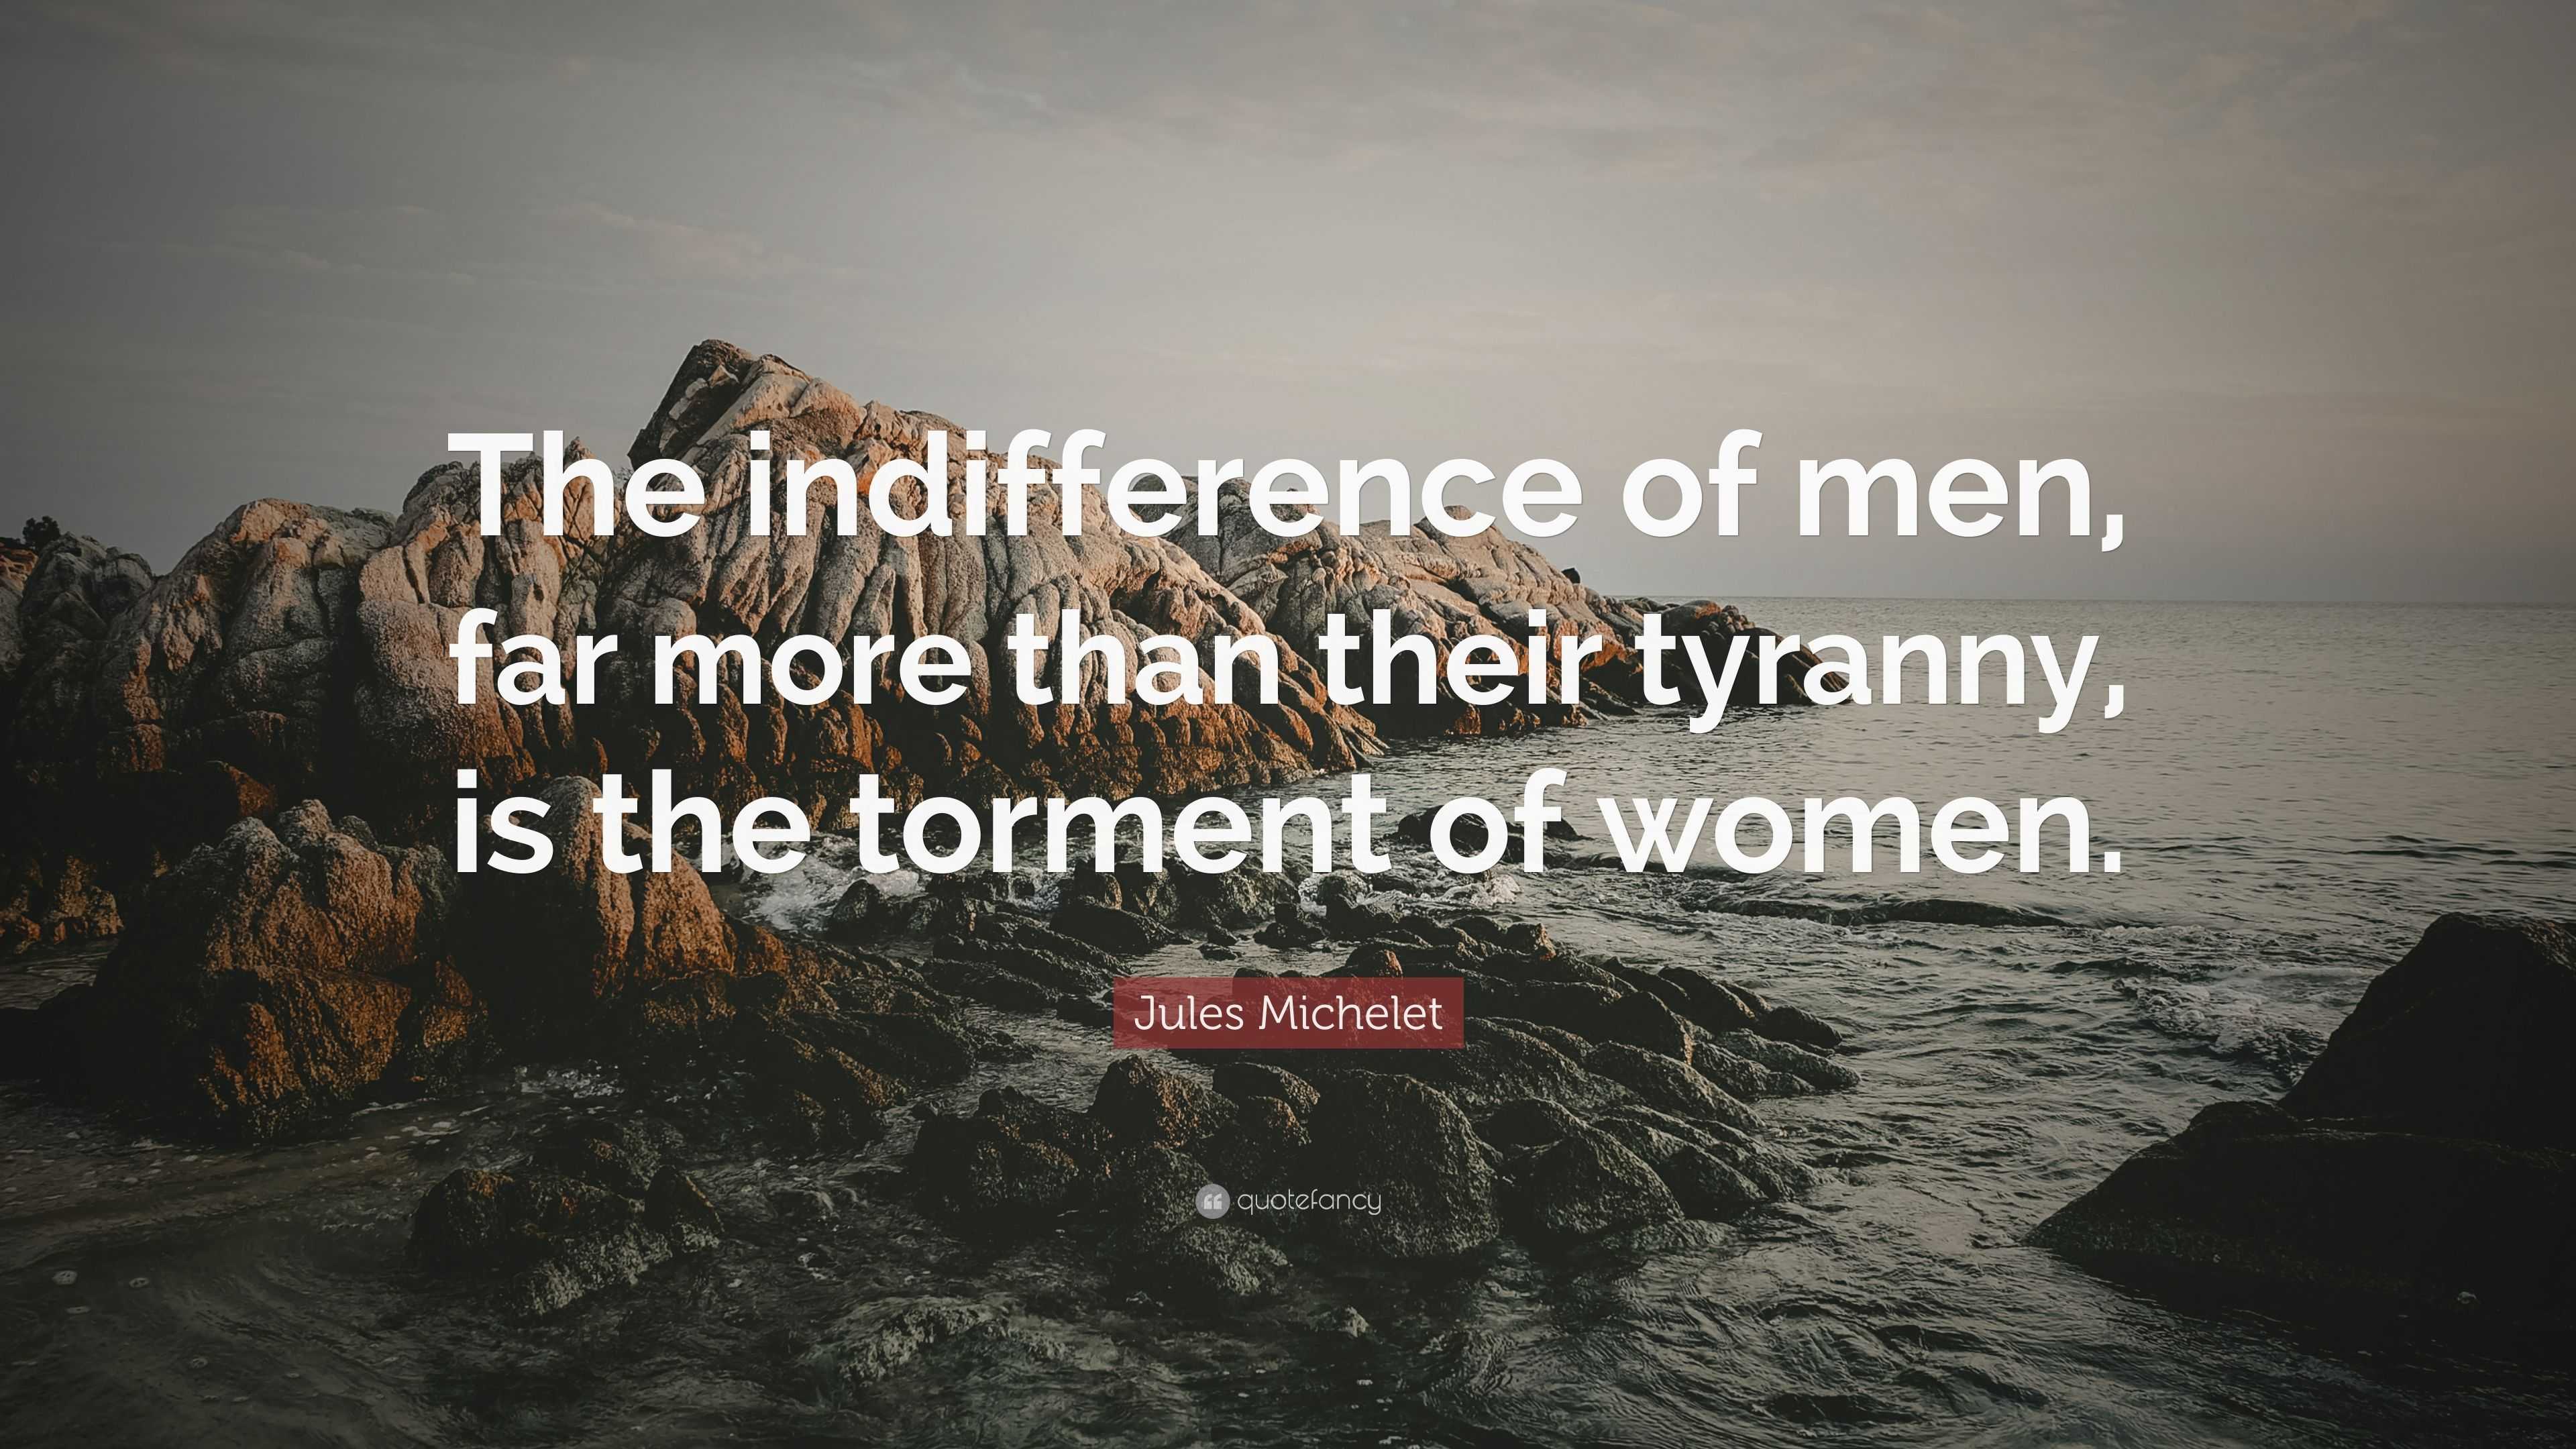 Jules Michelet Quote: “The indifference of men, far more than their ...